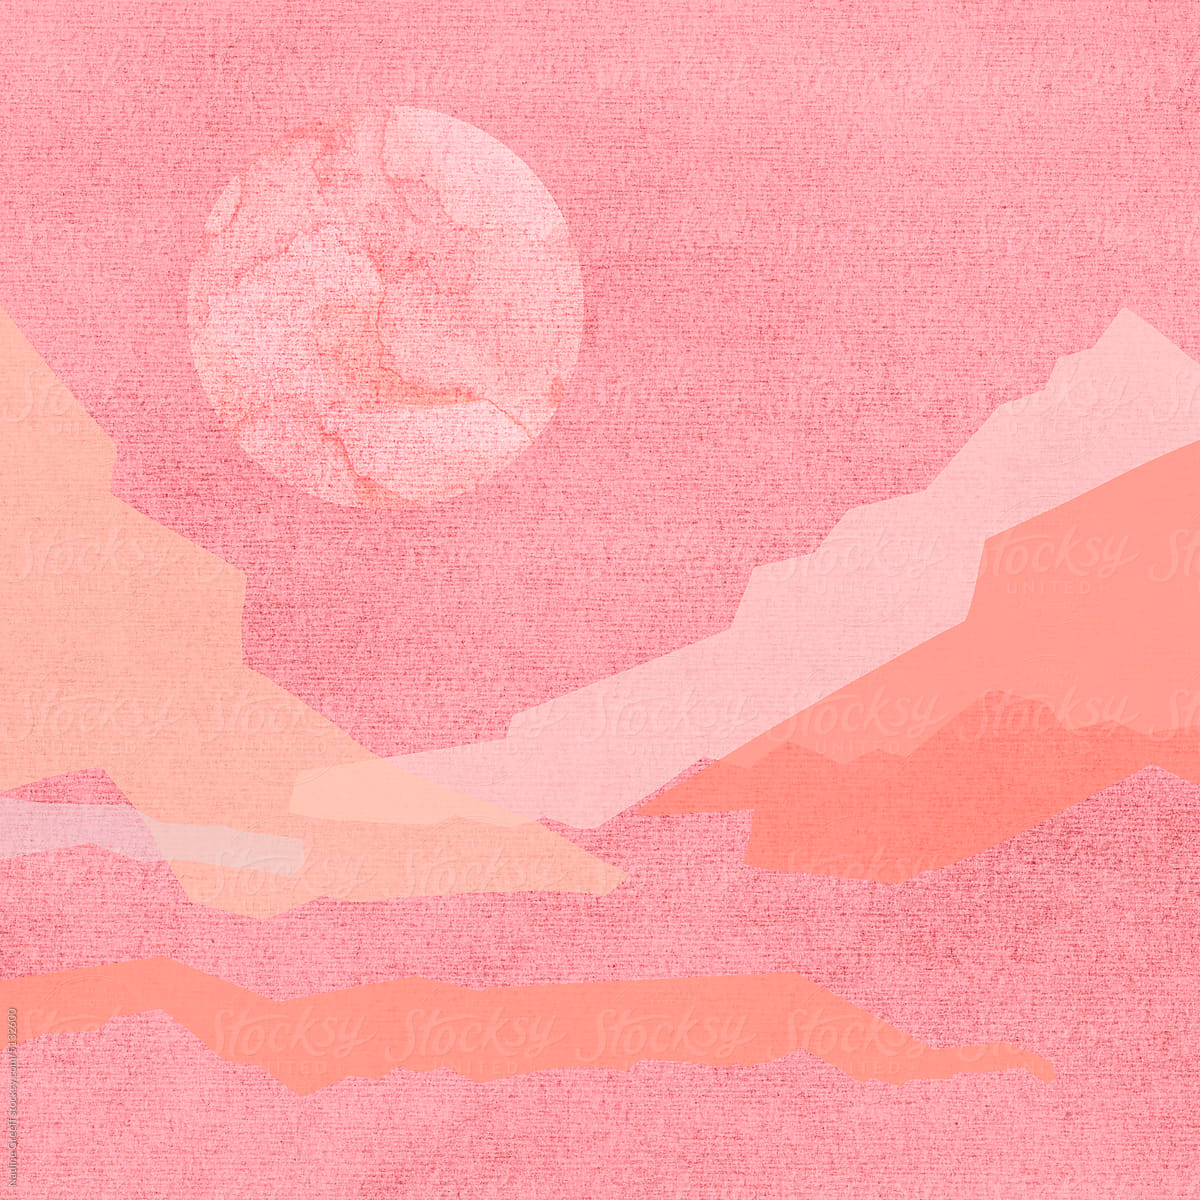 Abstract landscape pink moon, sky and mountains